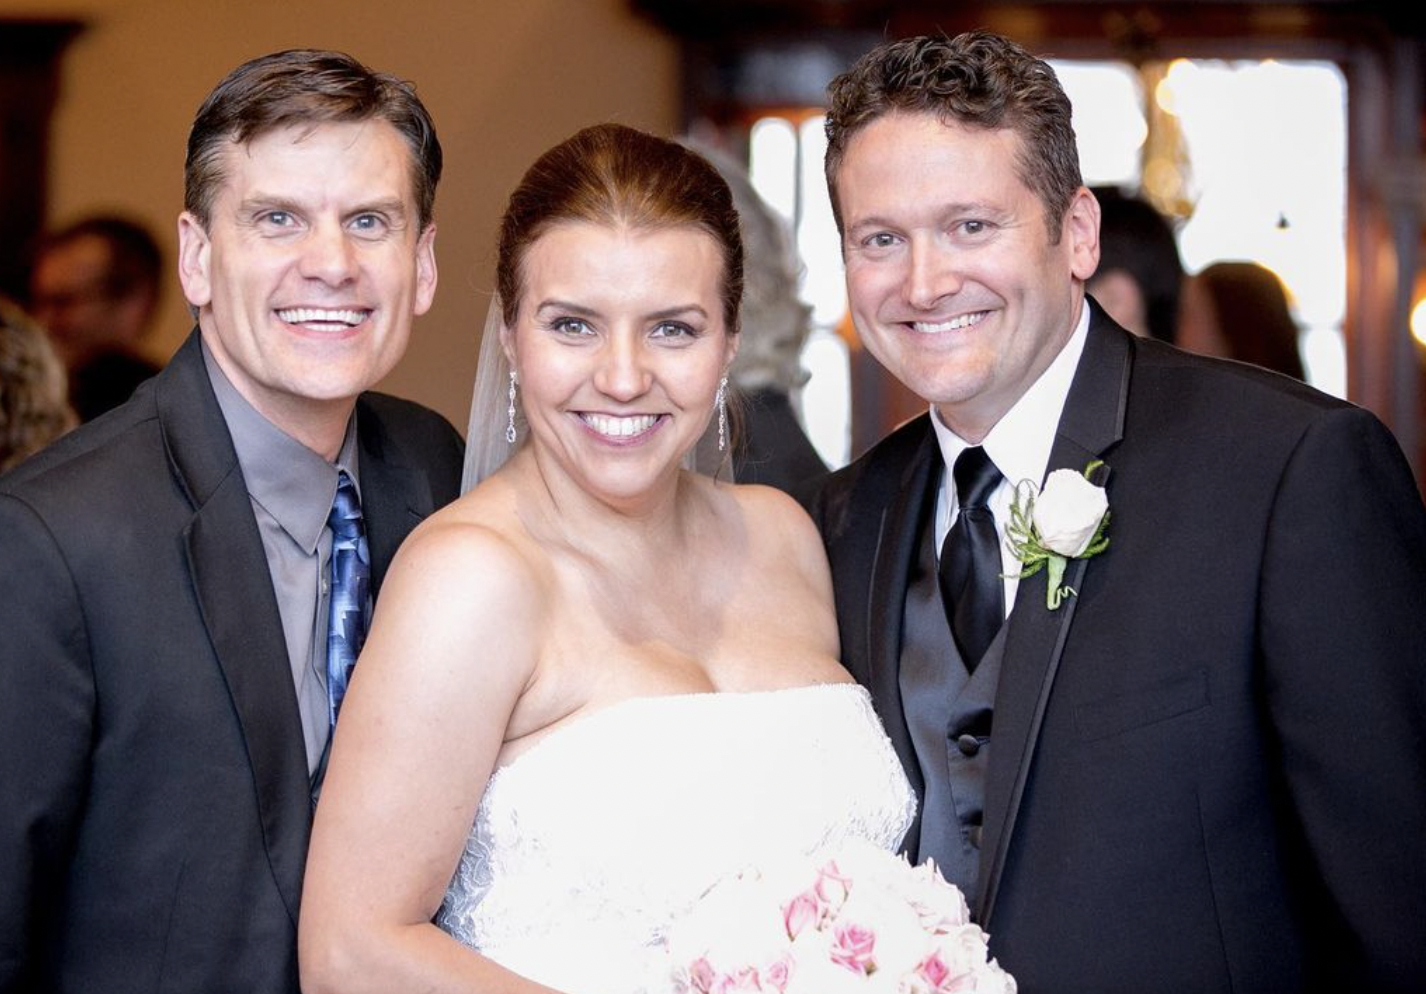 Bride, groom, and officiant smile for portrait